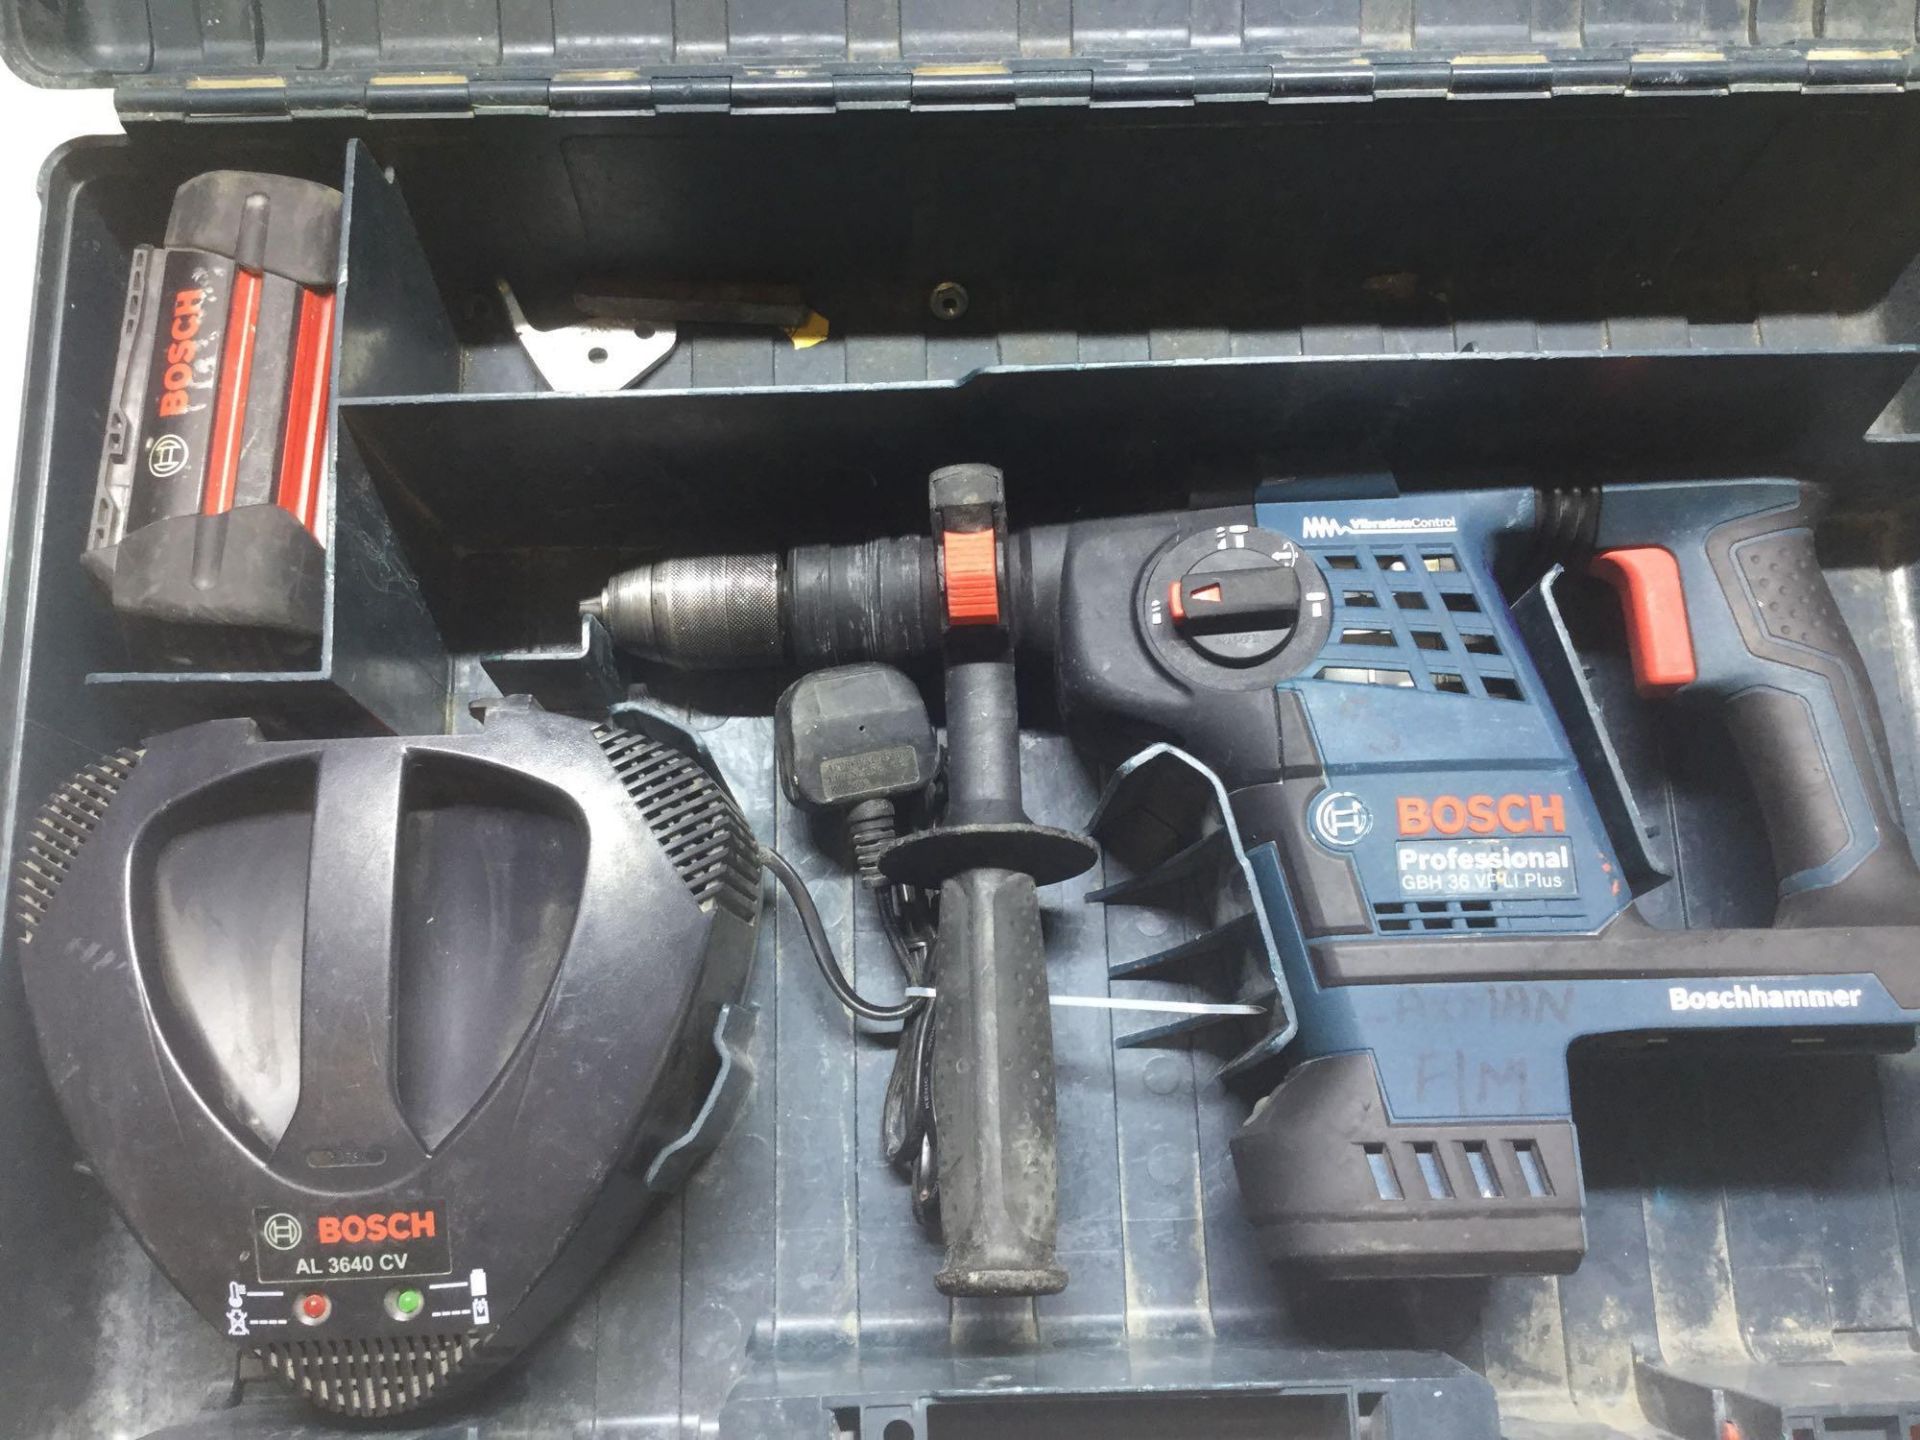 Bosch pro GBH 36v VF-li Plus SDS Hammer Drill With standard chuck c/w Charger & Battery - Image 2 of 6